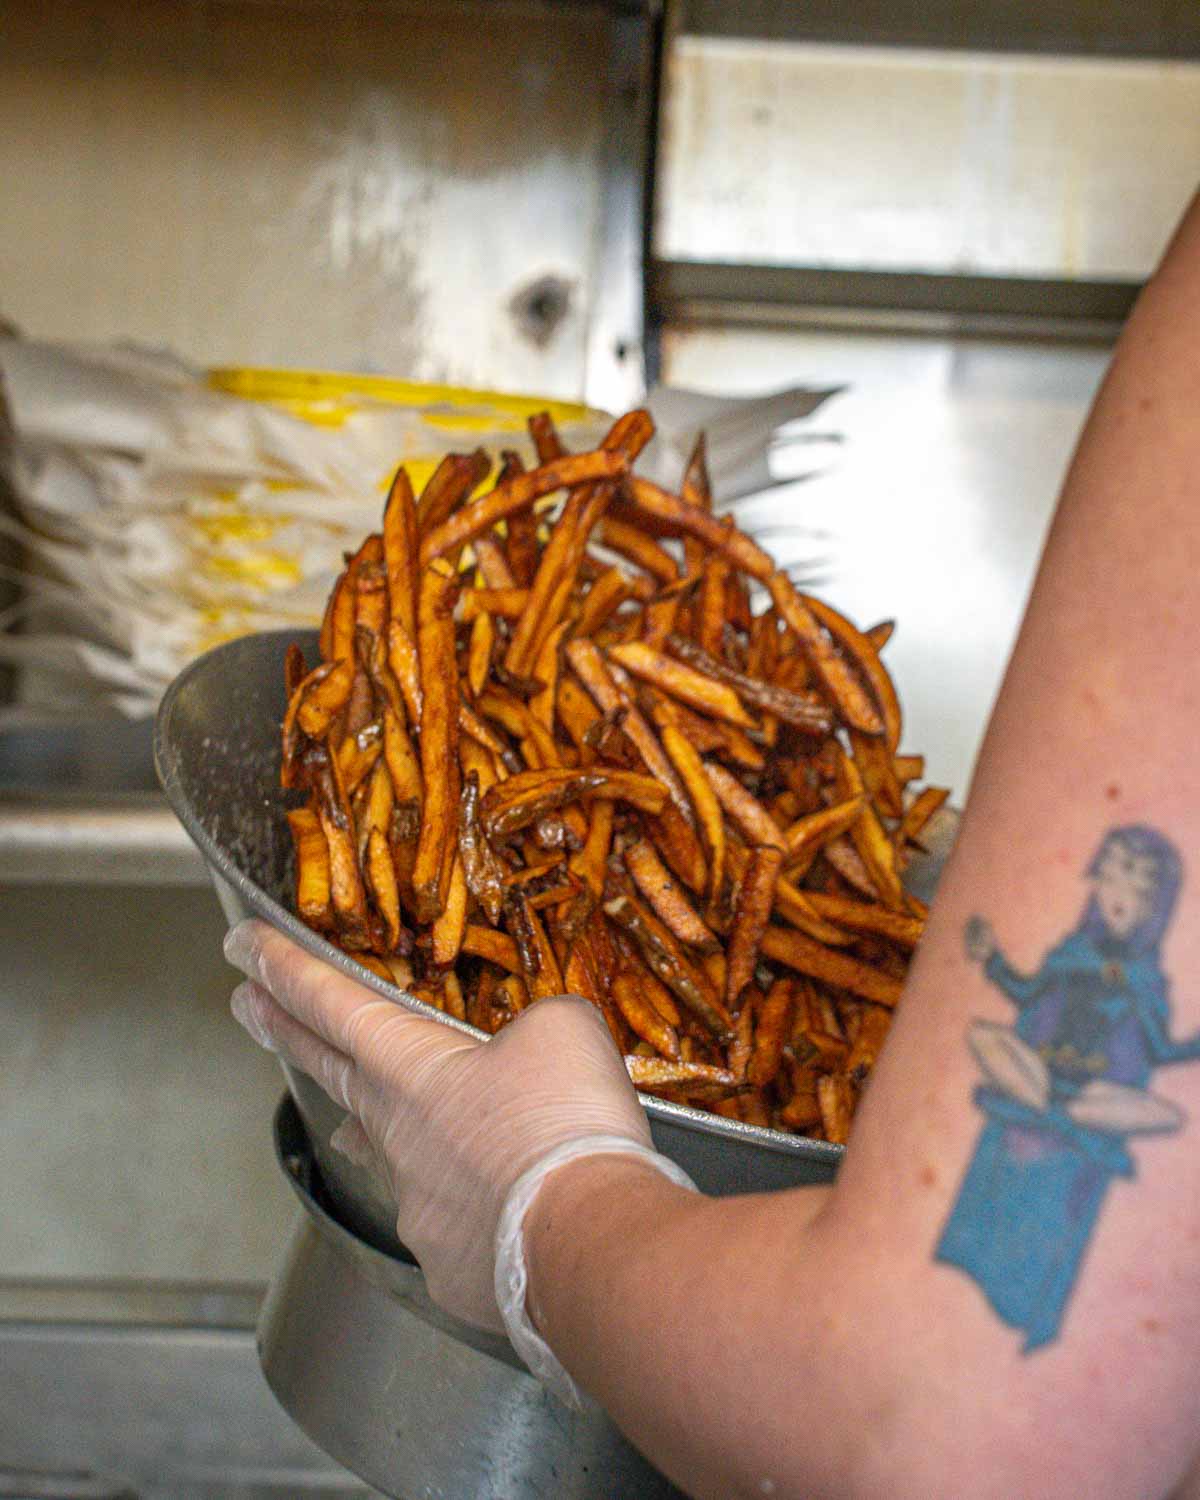 Oregon fries being tossed